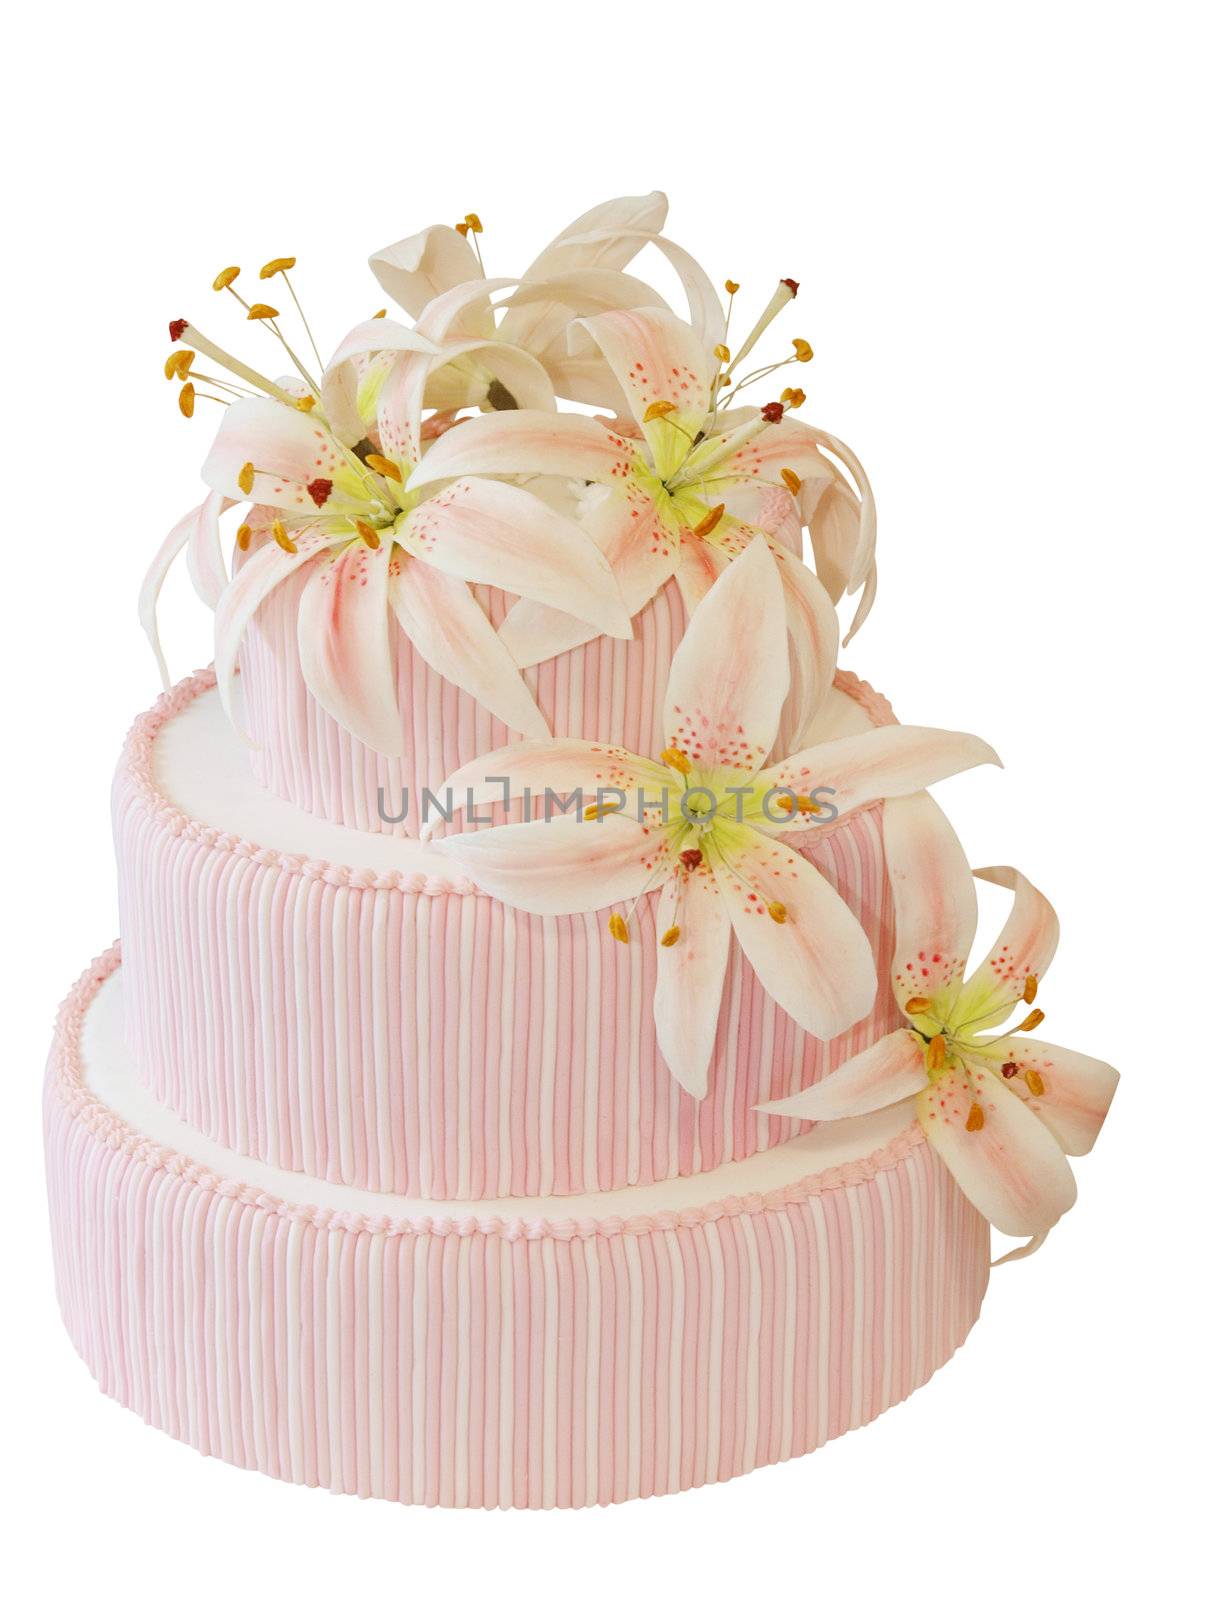 Three Tiered Iced Cake with Icing Orchid Decoration  by MargoJH